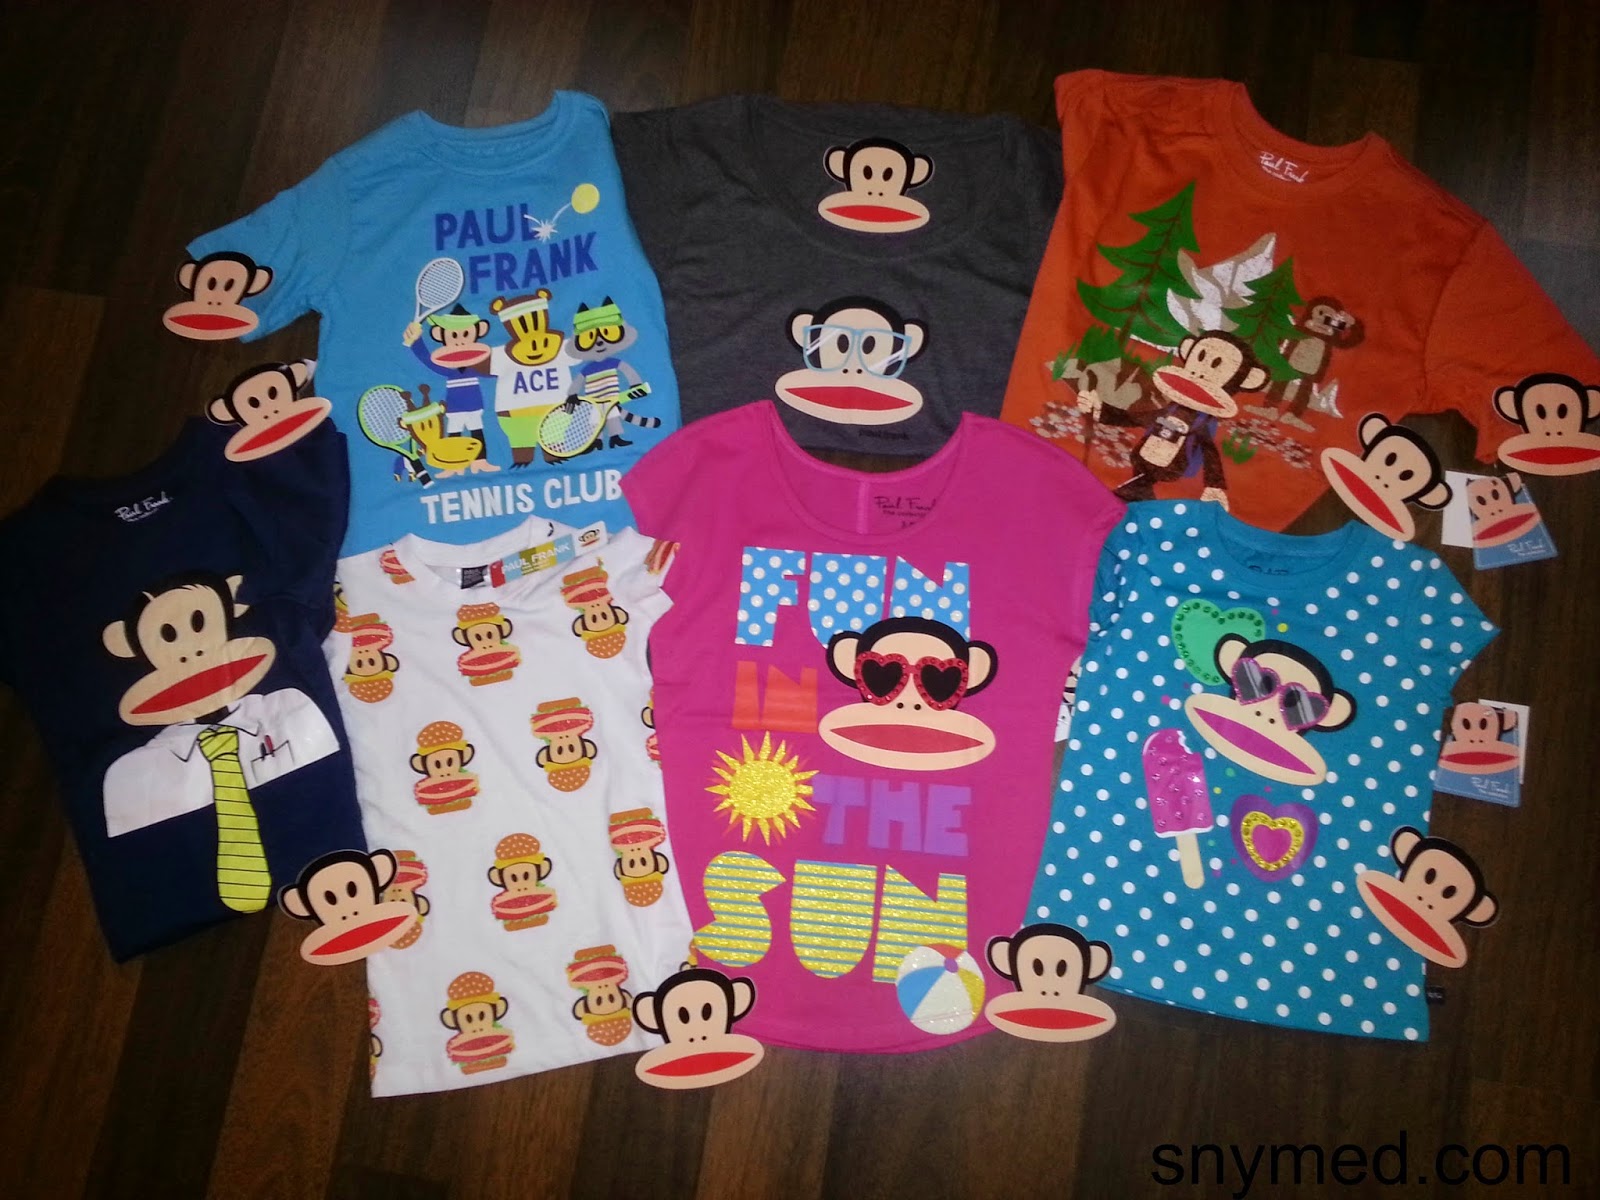 Paul Frank Brings Fun & Colour to Julius Monkey Clothing Line! ~ snymed